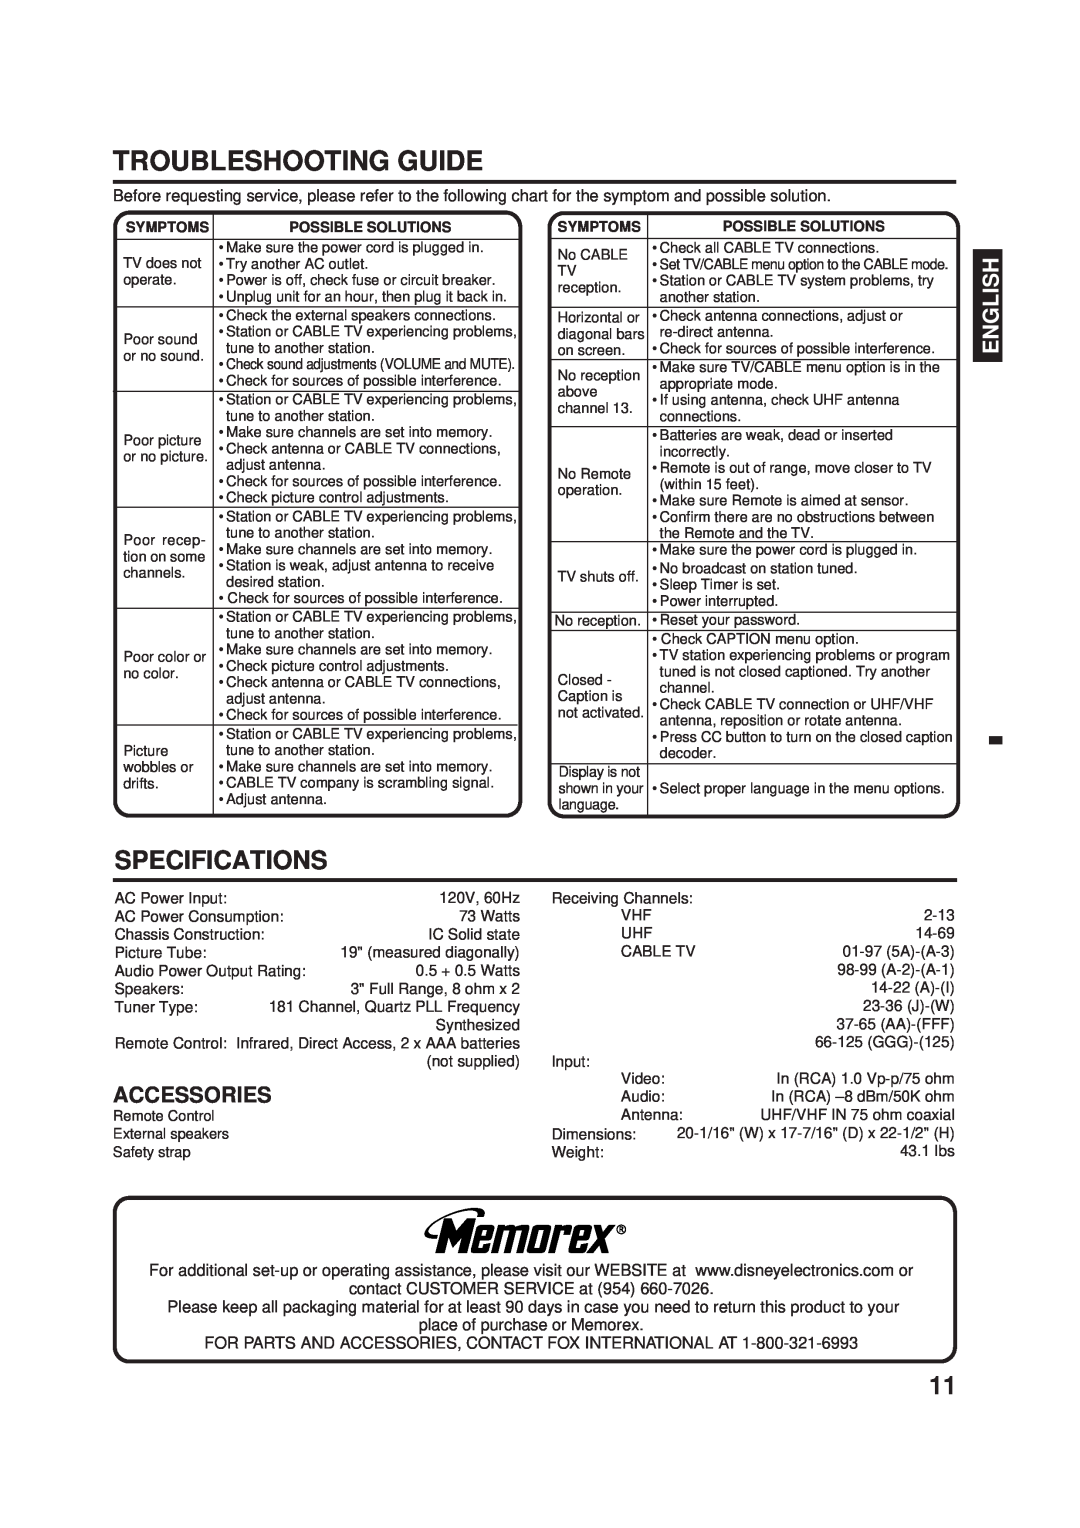 Memorex DT1900-C manual Troubleshooting Guide, Specifications, Accessories, contact CUSTOMER SERVICE at 954, English 